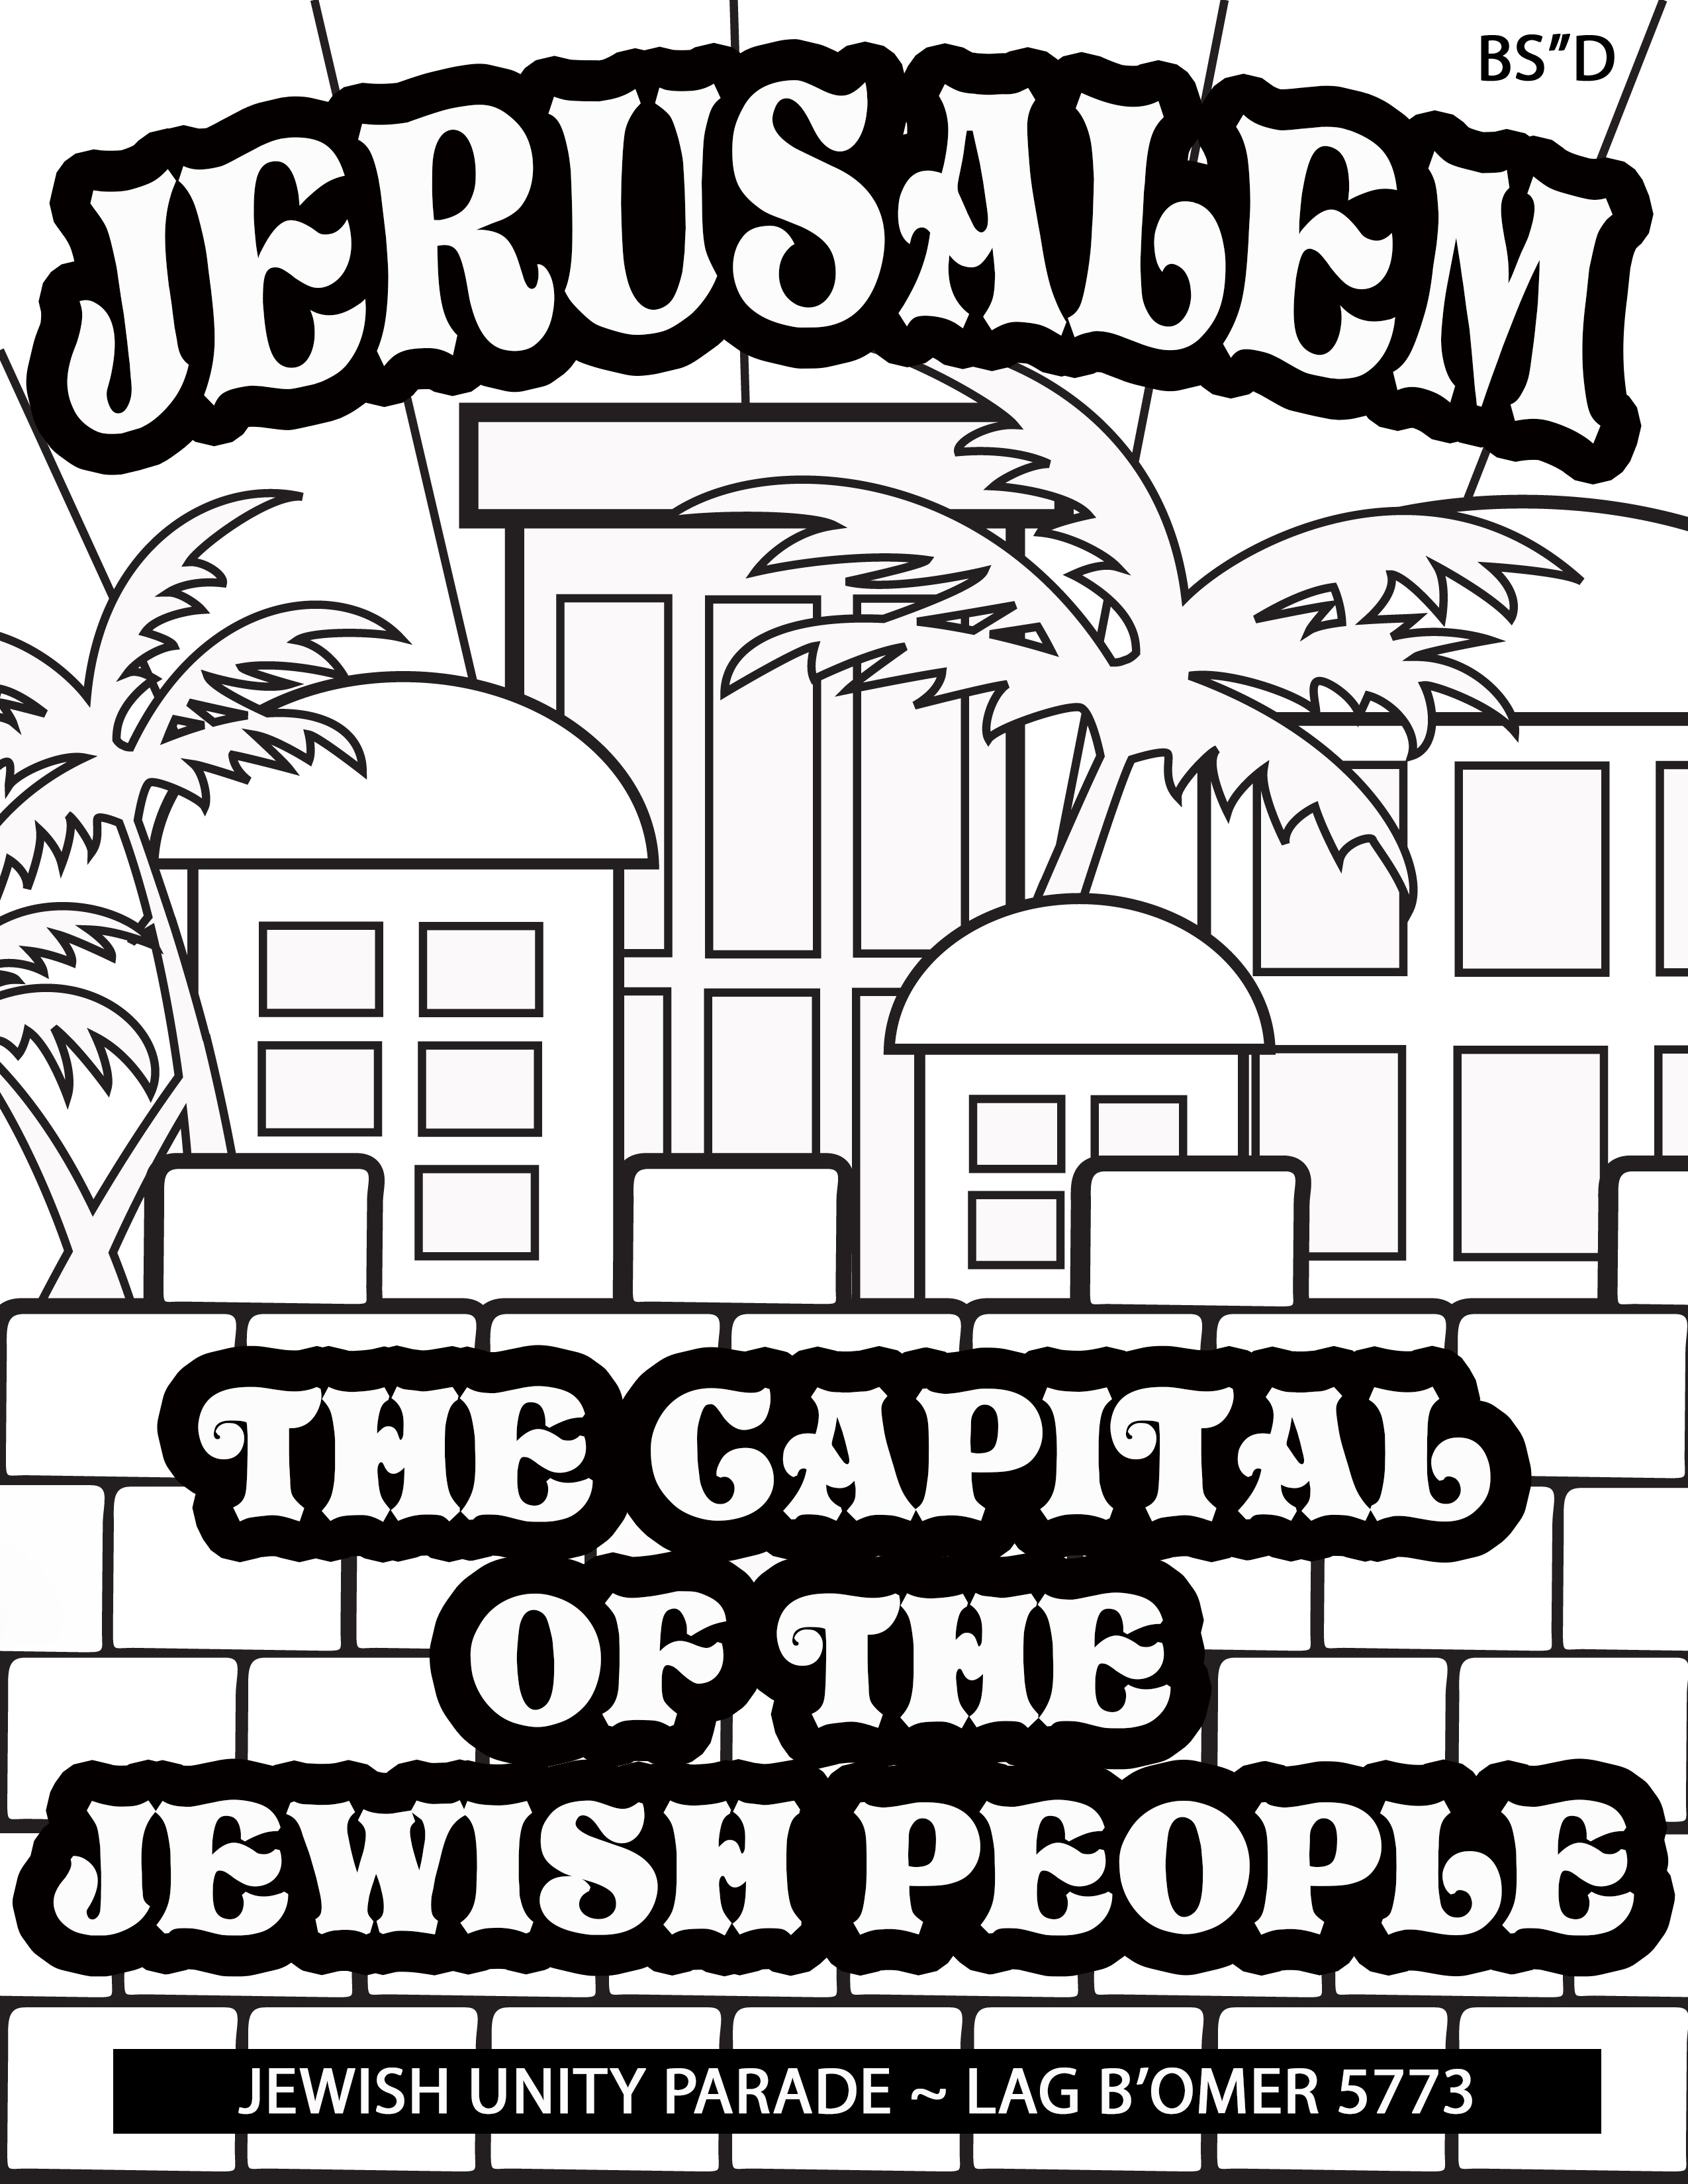 Coloring Pages 14 Mar Jerusalemcapital of the jewish people